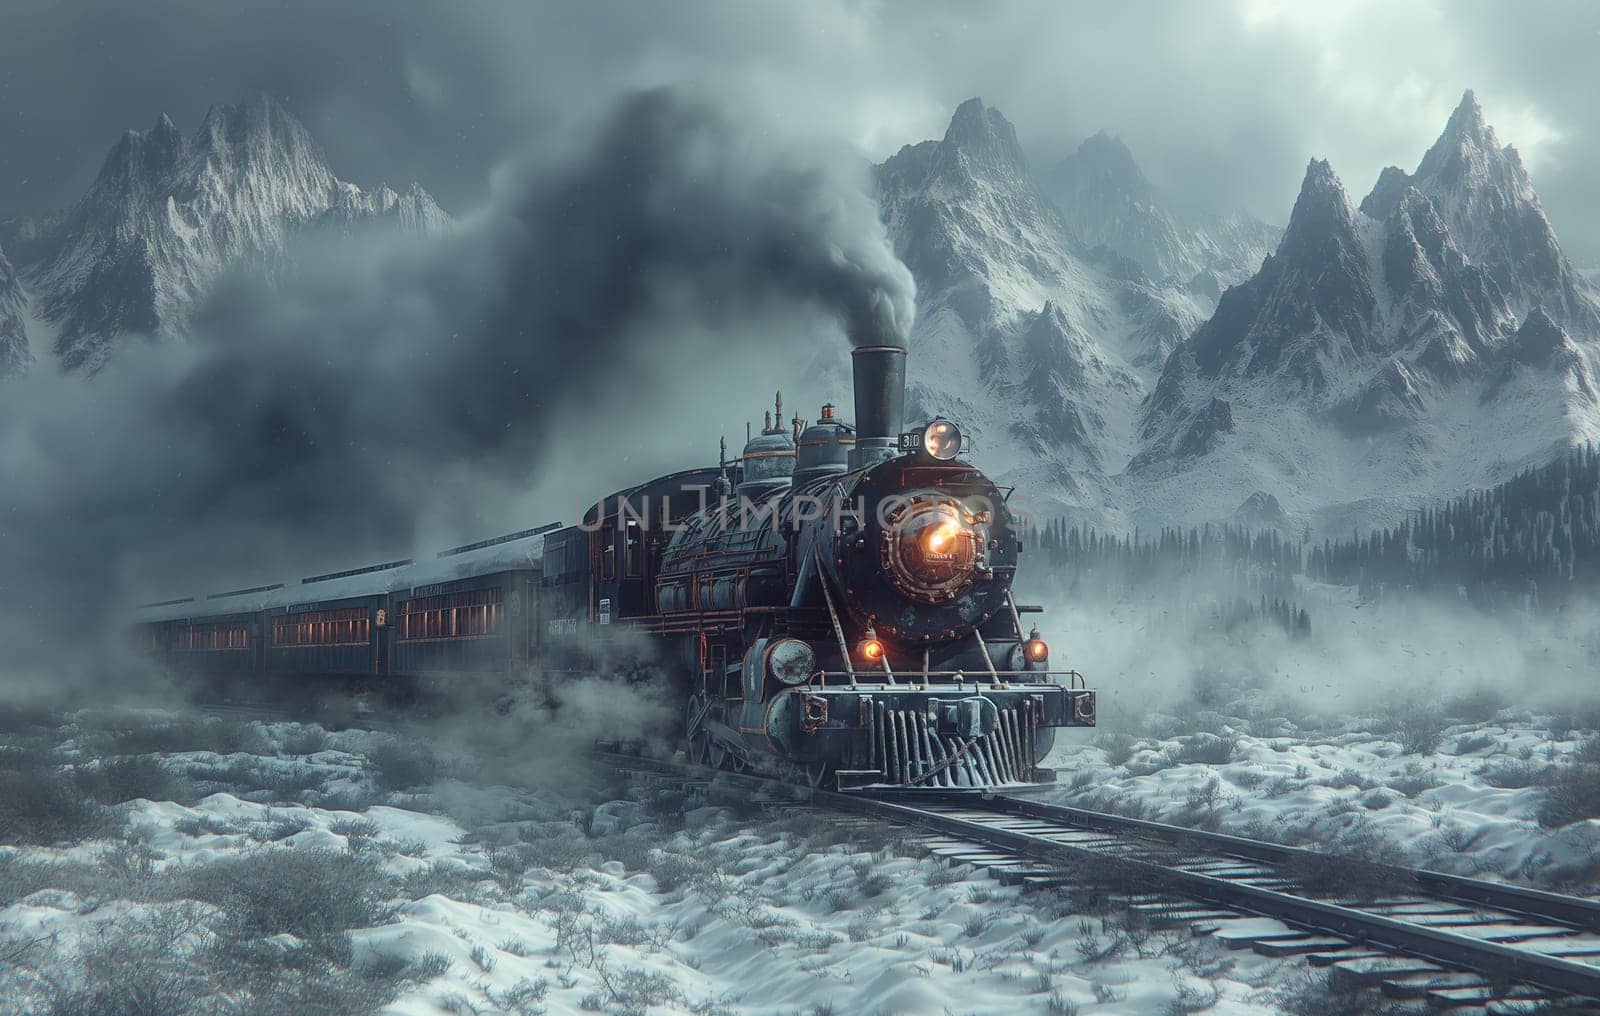 The locomotive rushes along snow-covered rails. by Fischeron